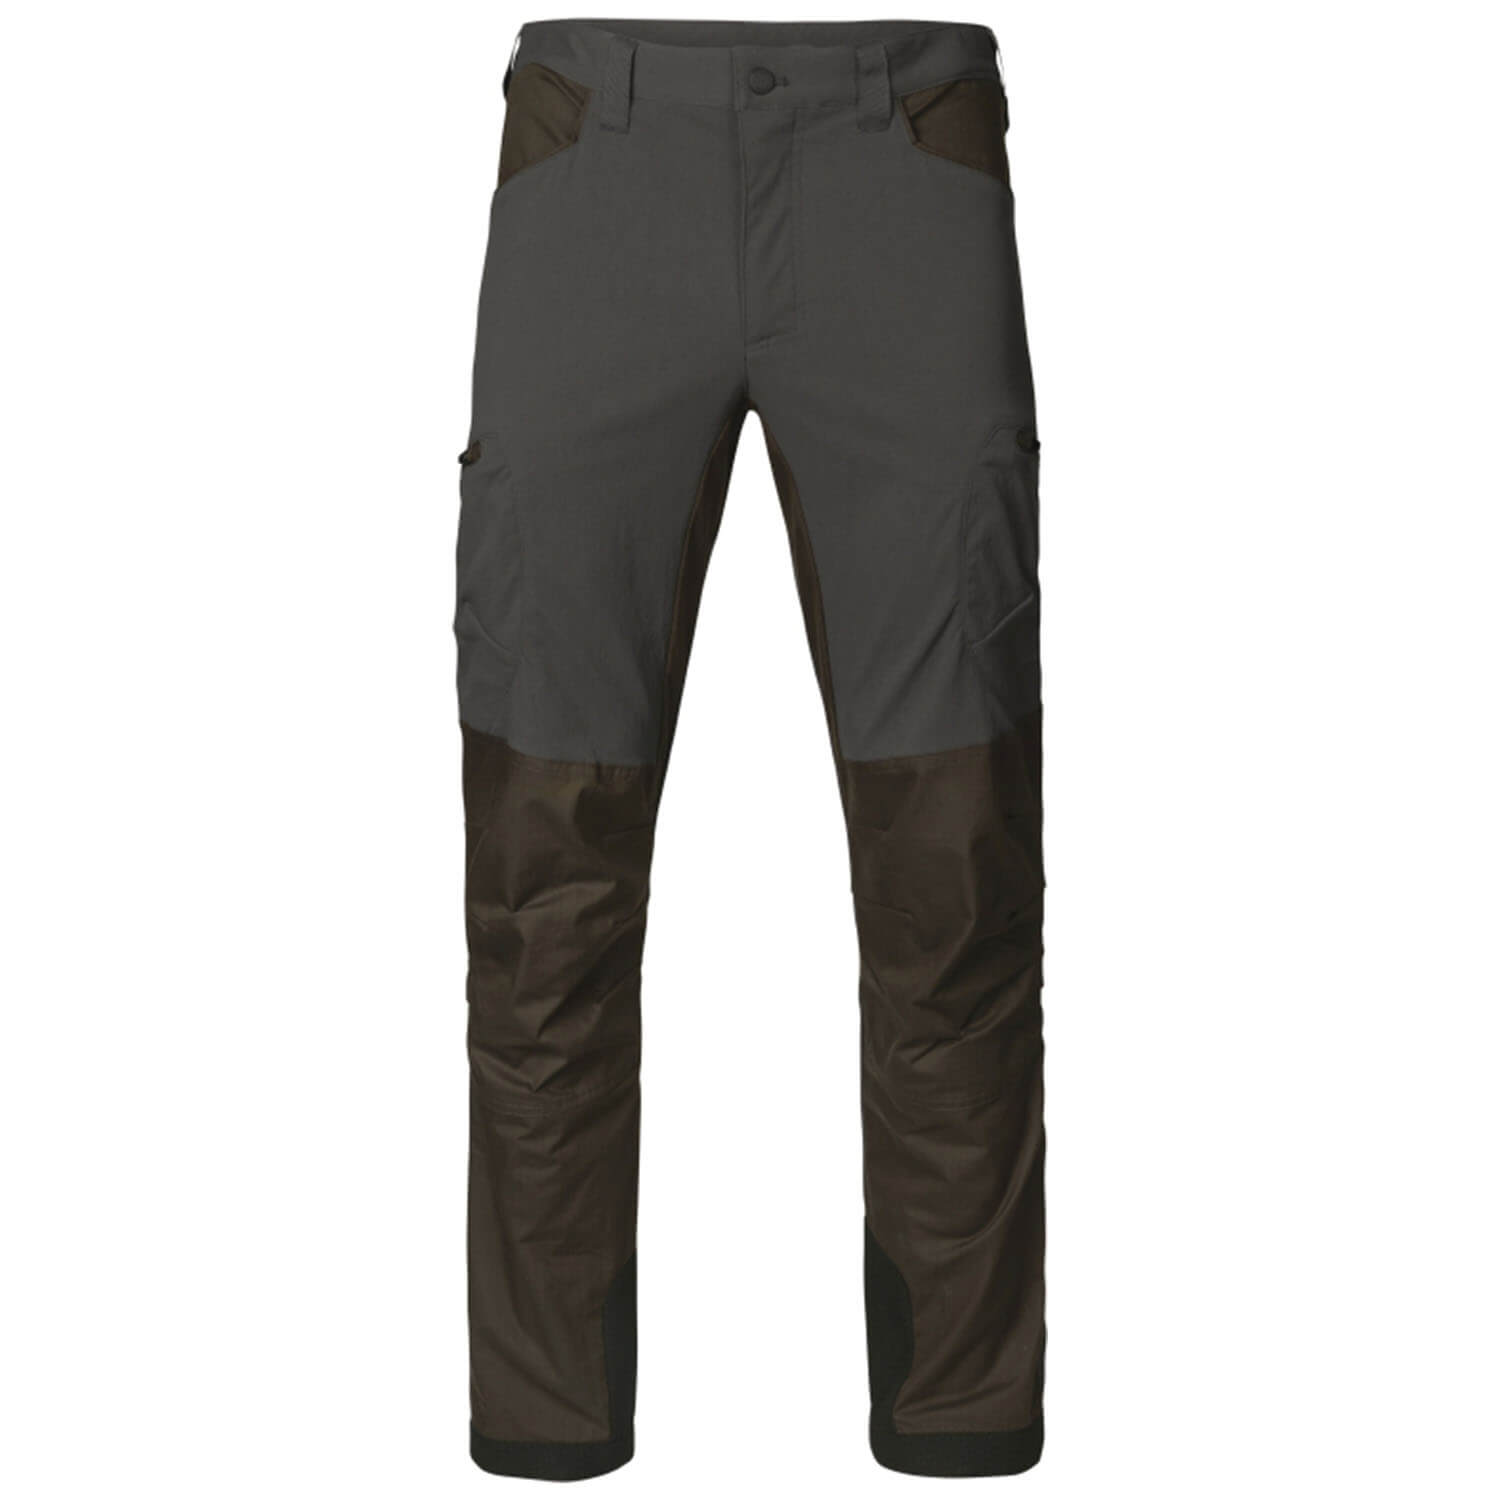 Härkila Ragnar Trousers (Grey/Willow Green) - Hunting Trousers